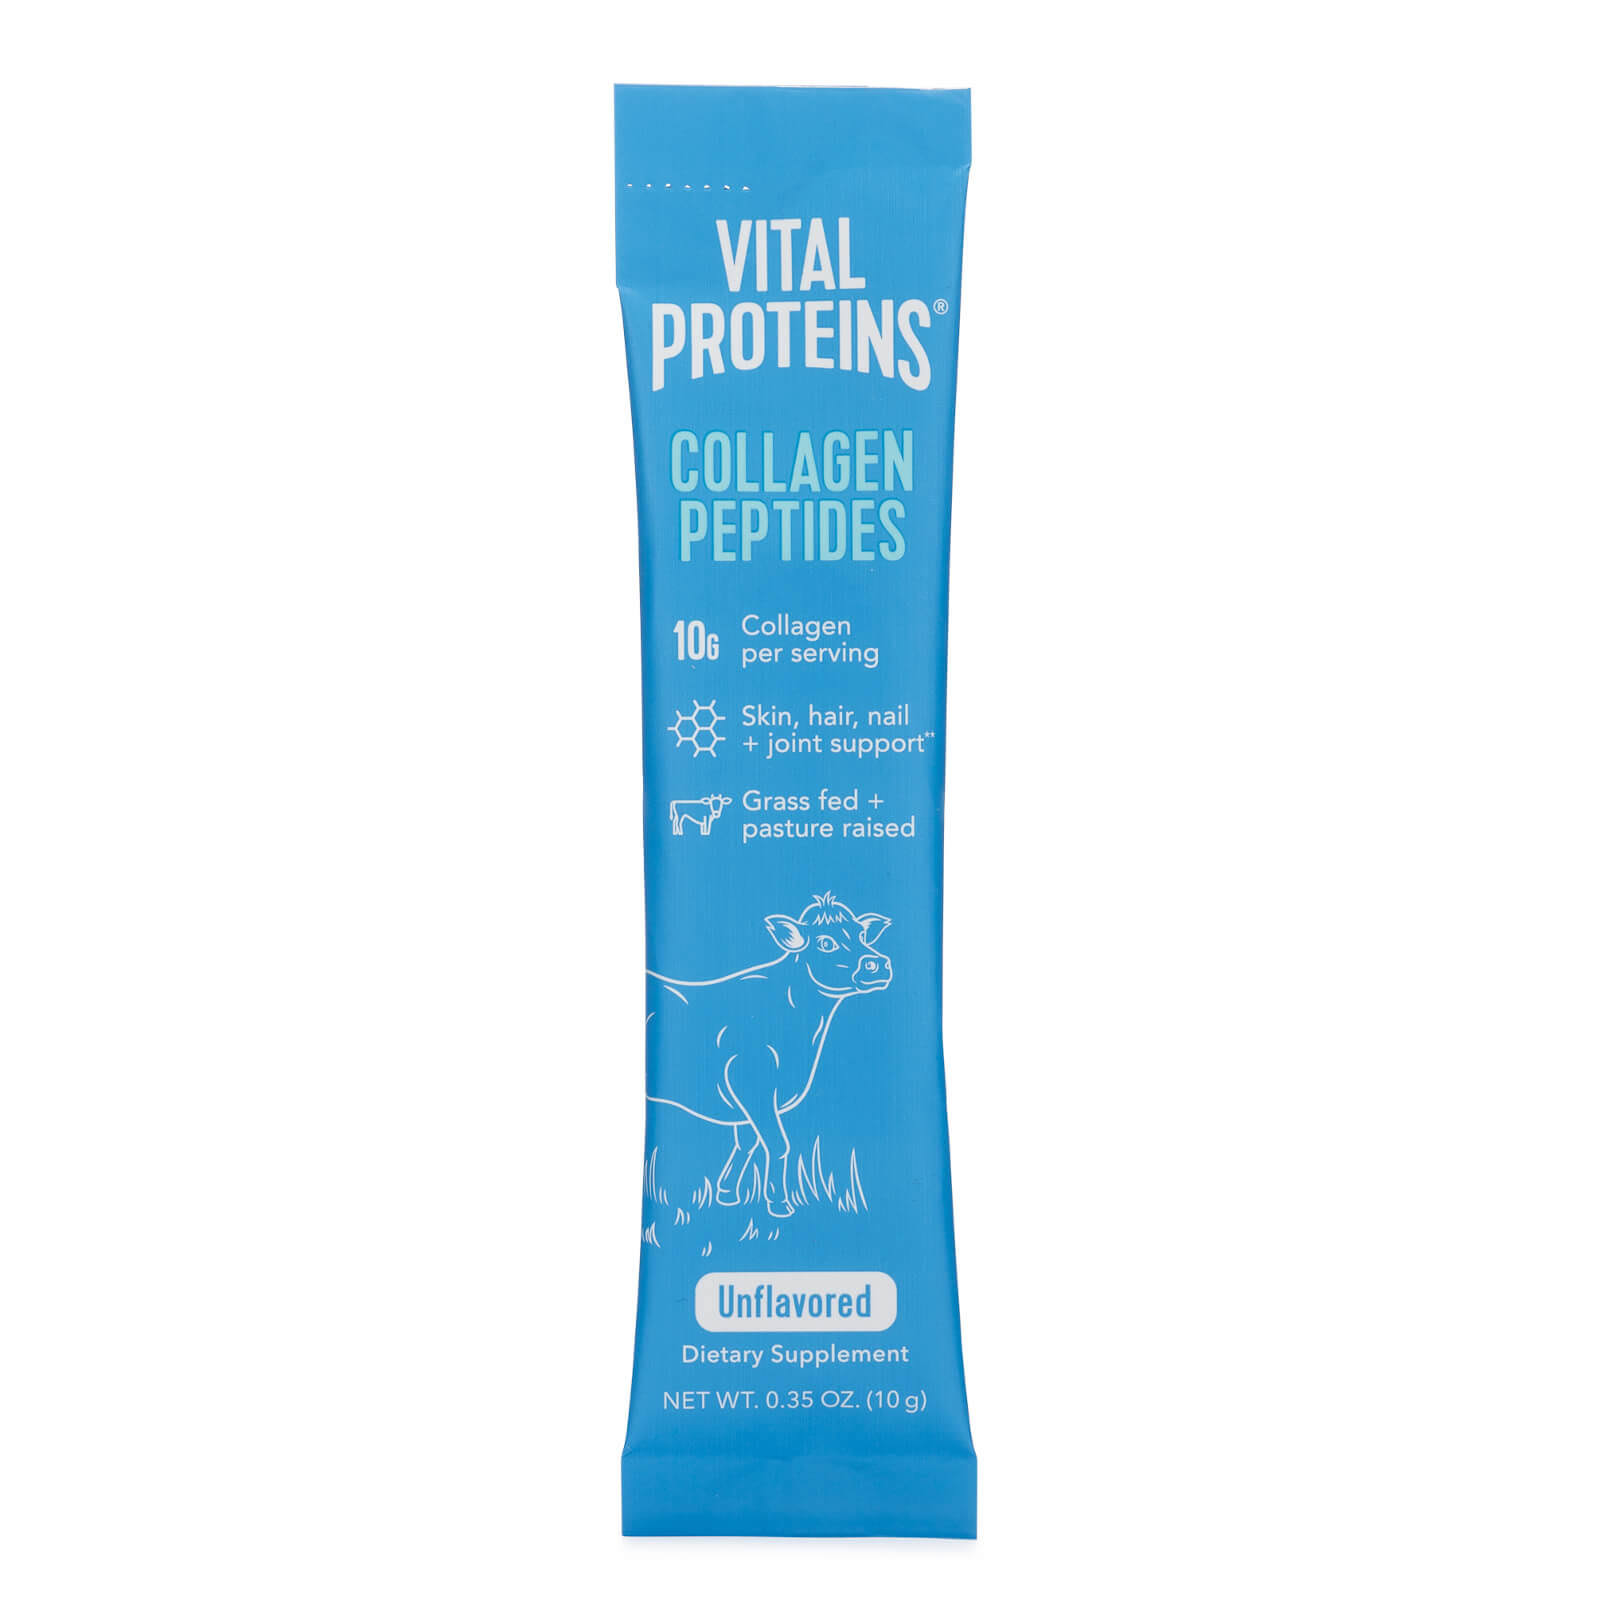 Vital Proteins Collagen Peptides Stick Pack